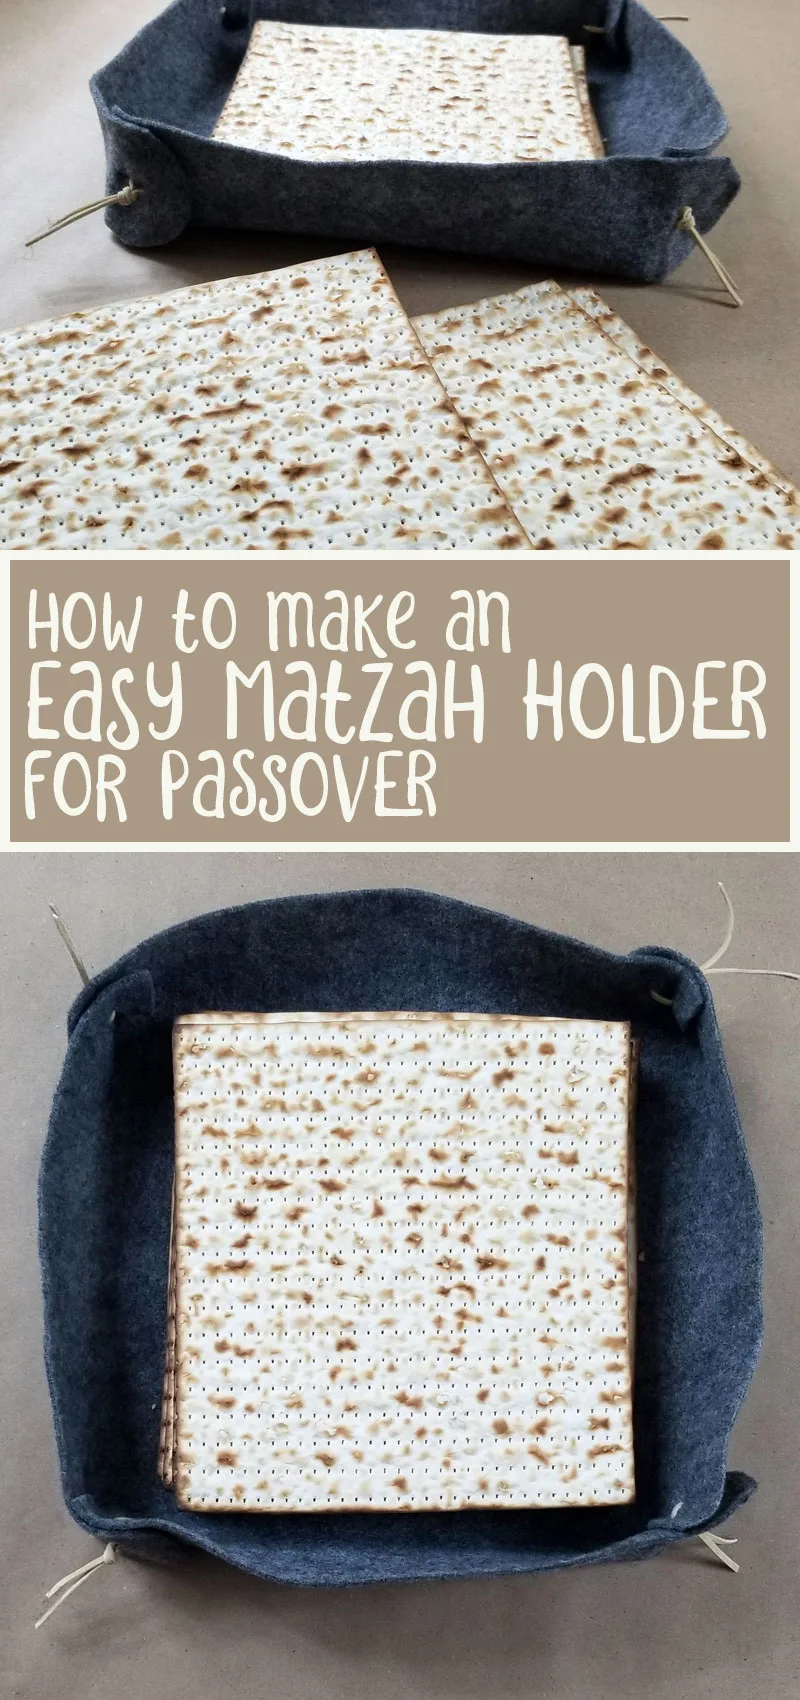 Make your own matzah plate - a cool Pesach craft for anyone! this DIY Passover craft is a felt matzah tray for your seder that anyone can make